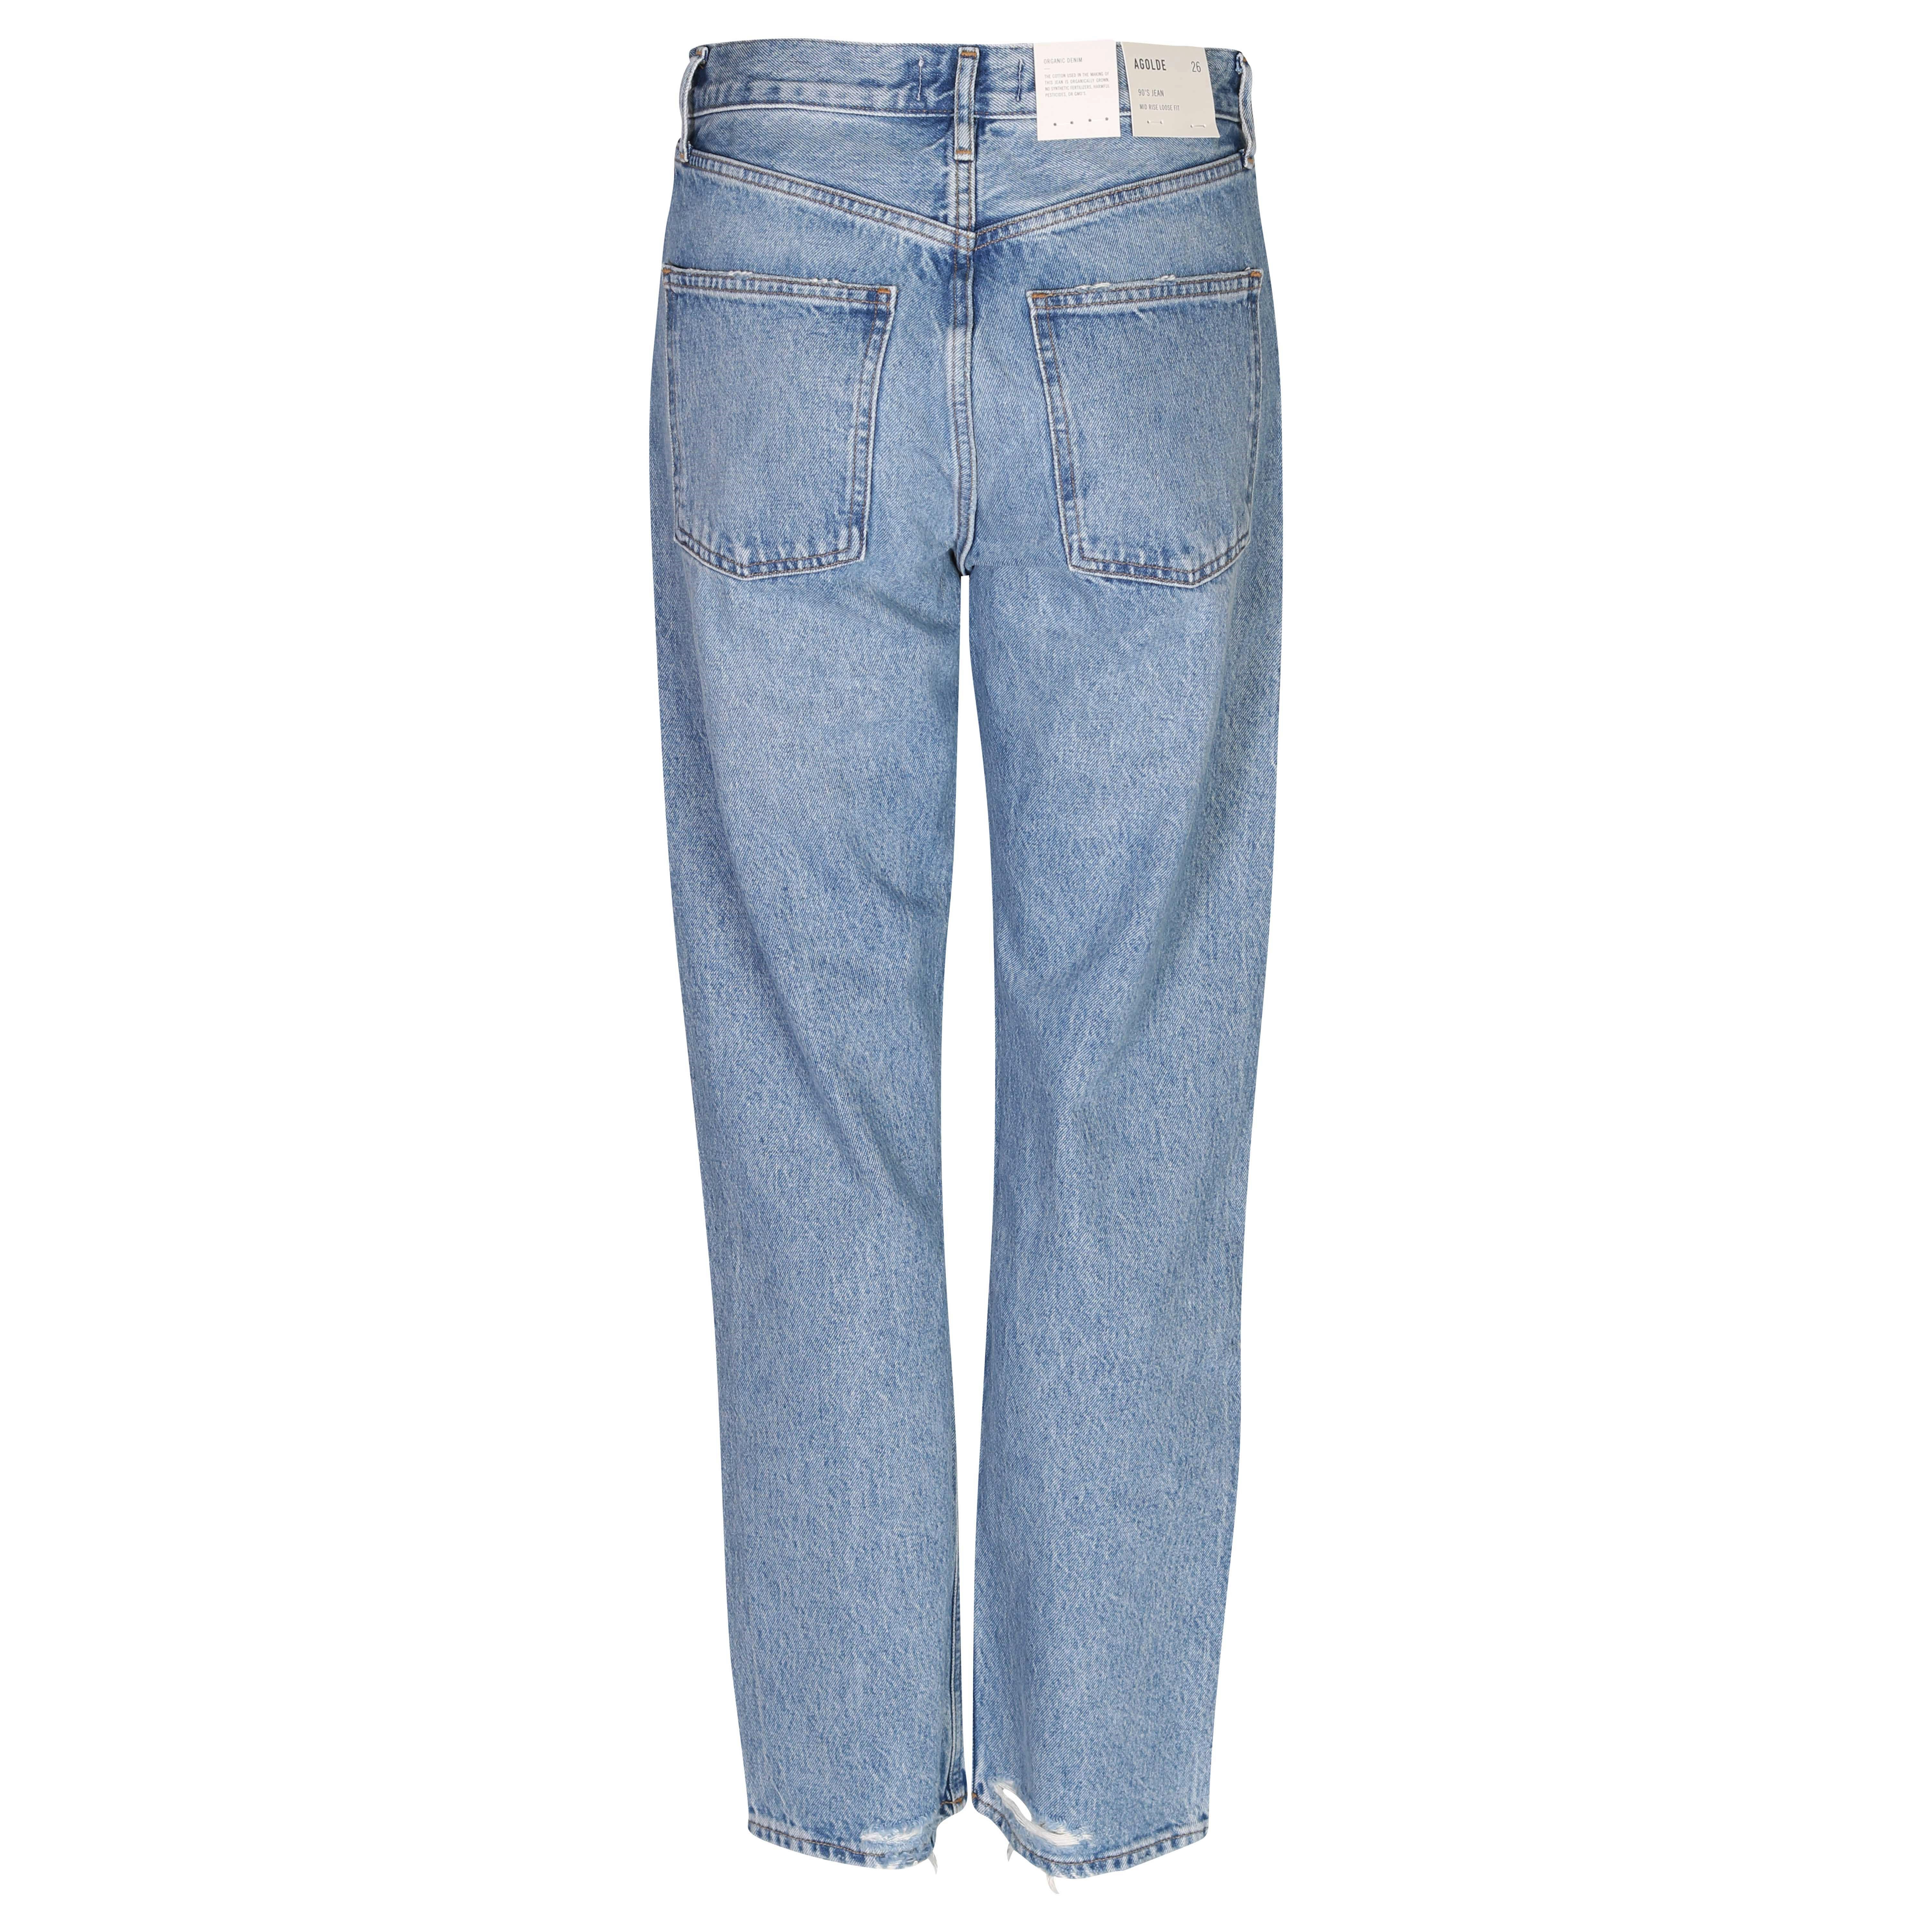 Agolde Jeans 90s Cropped in Scheme Washing W 30